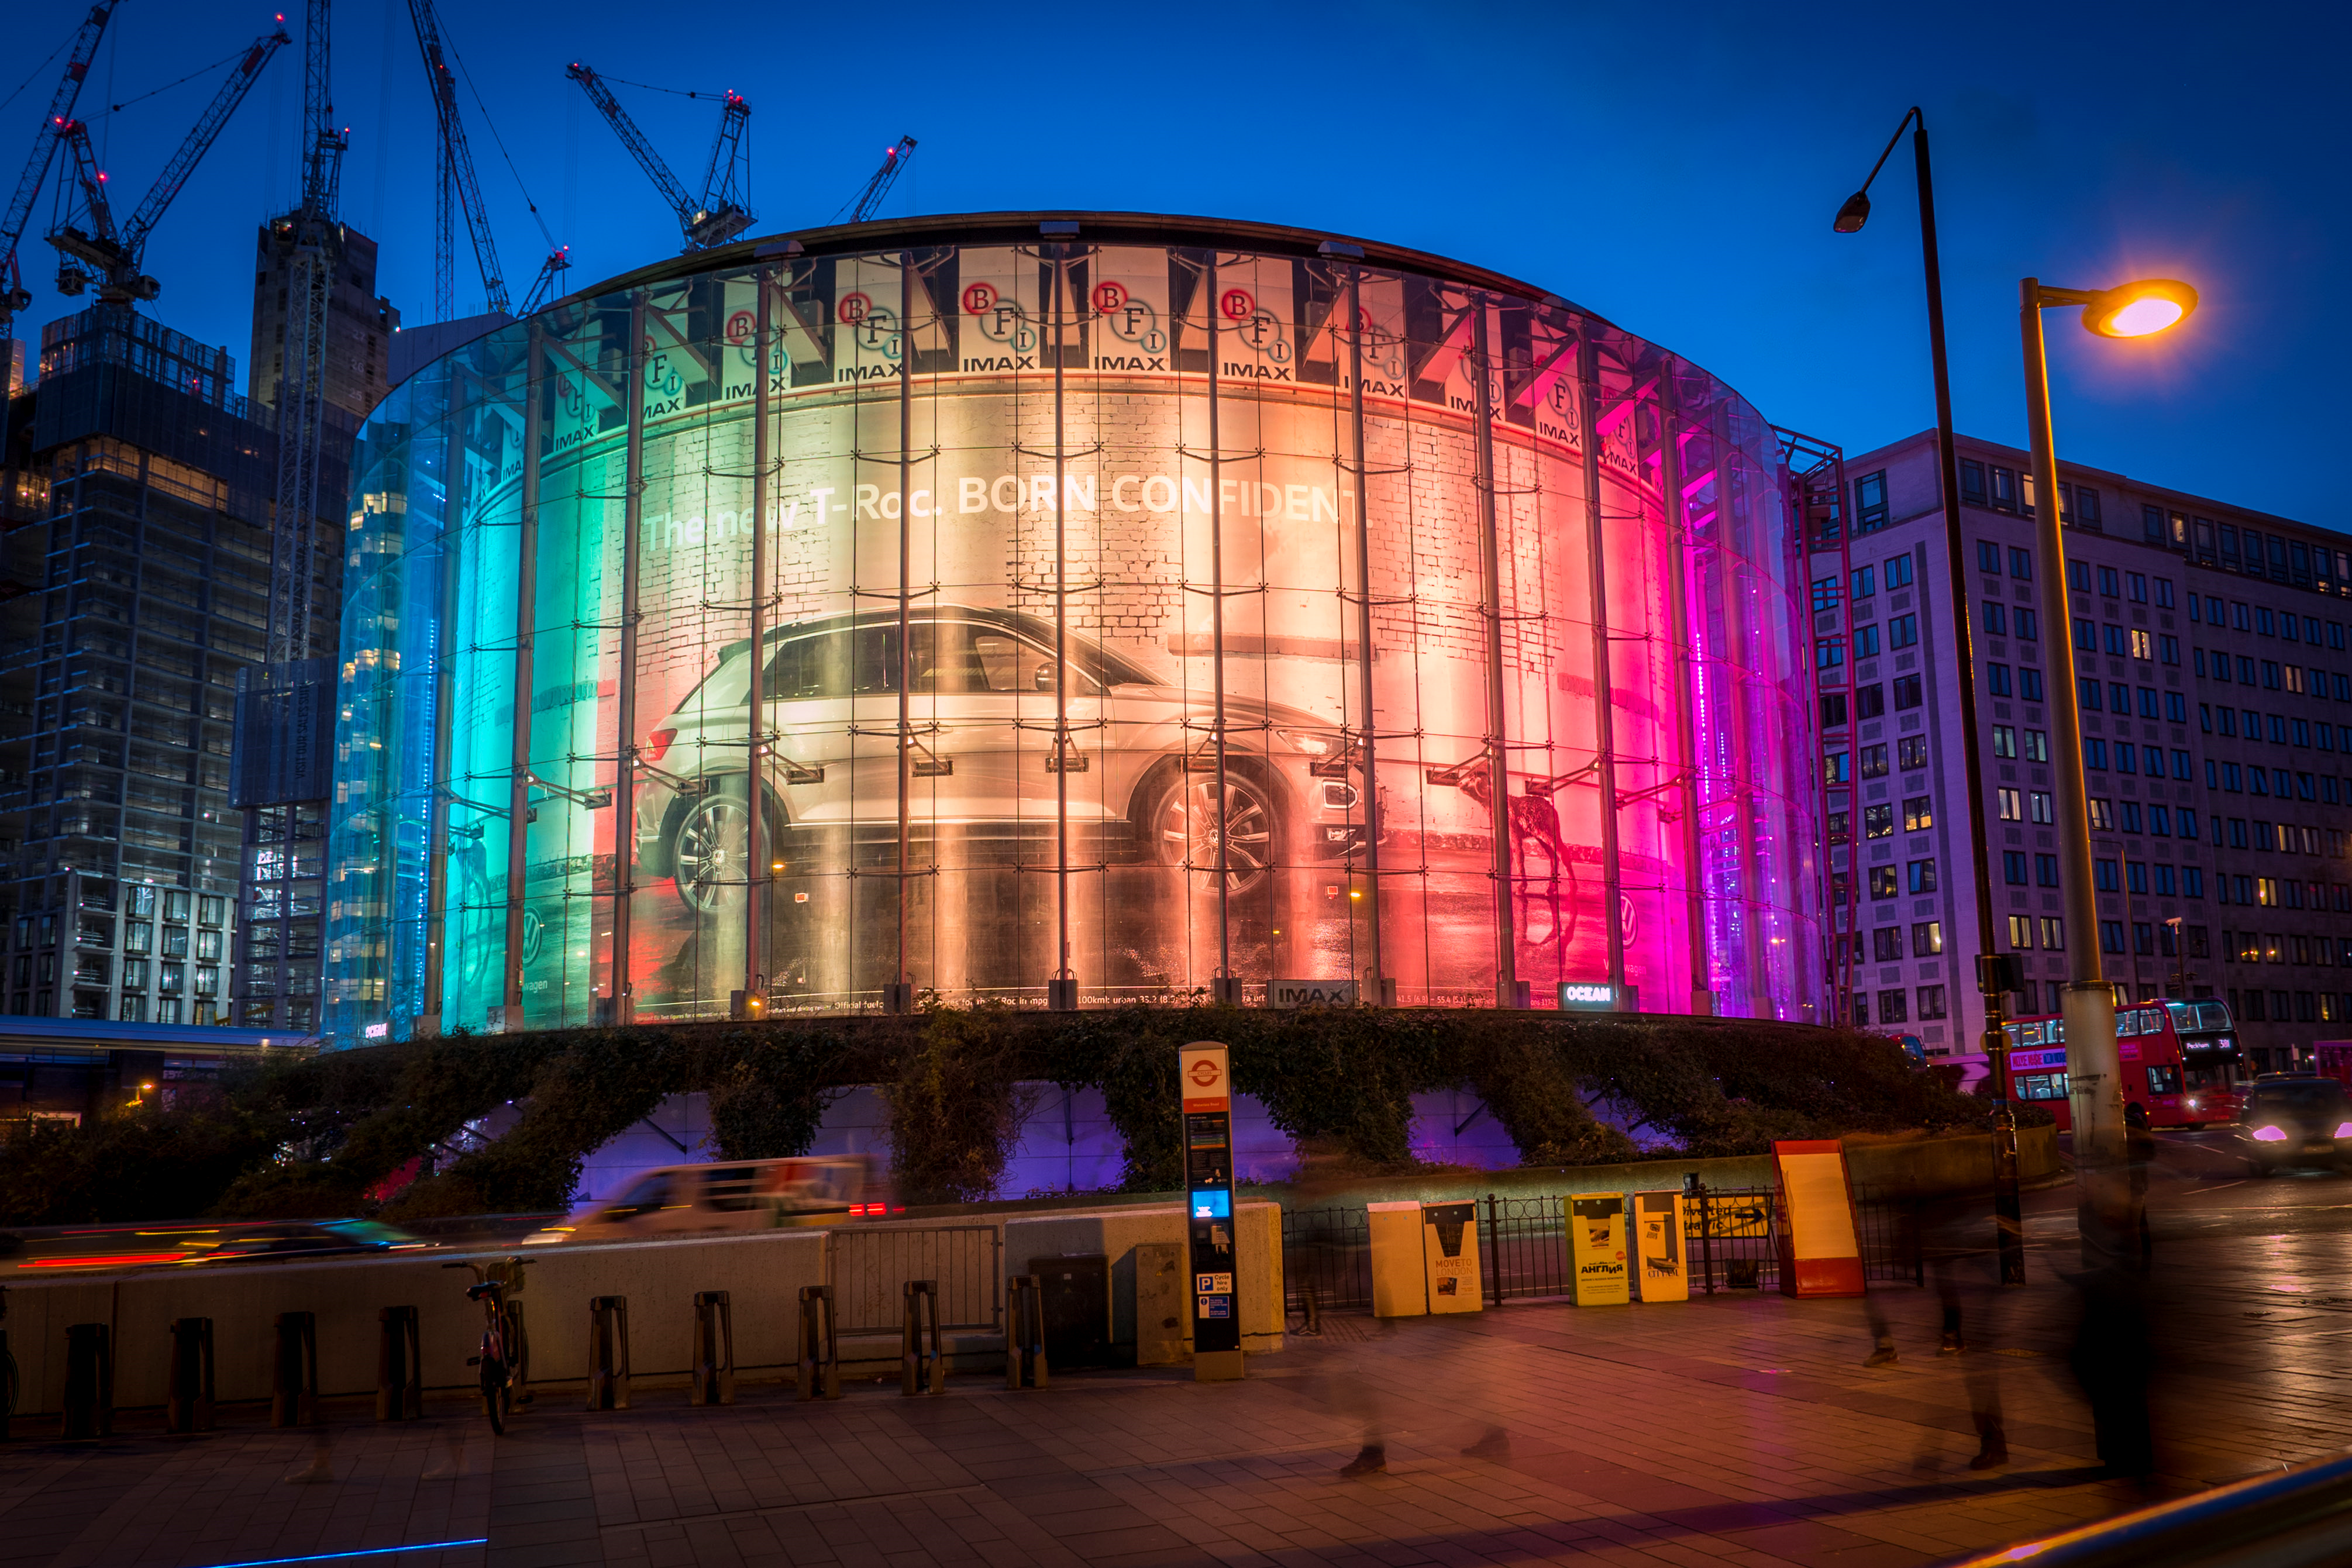 Volkswagen Lights Up IMAX London to Celebrate the Lumiere Festival of Light 